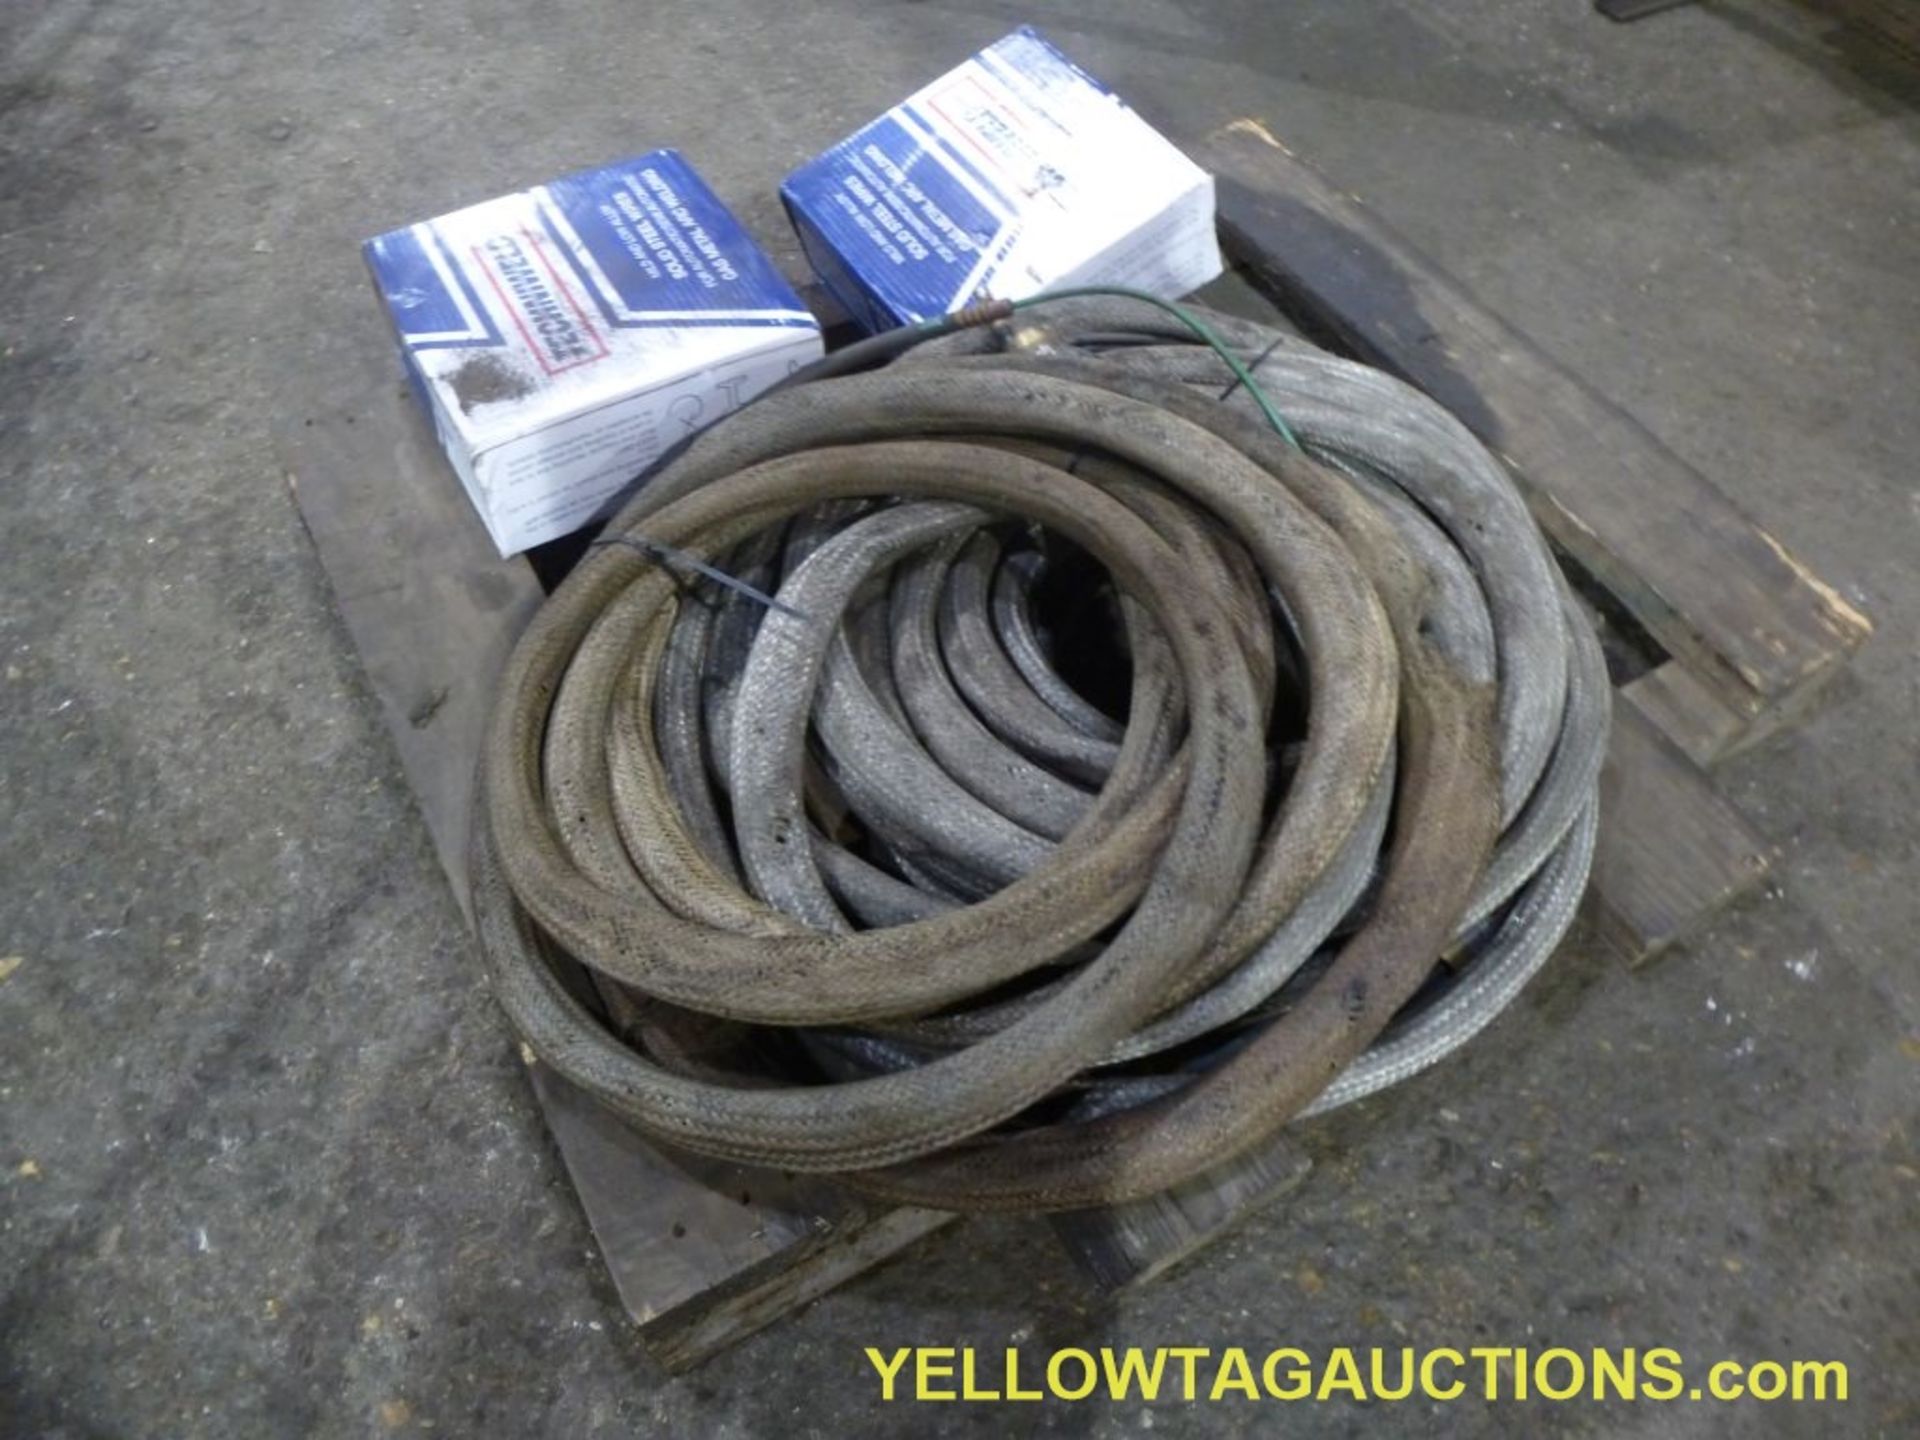 Lot of Assorted Wire and Hose|(2) Boxes of Solid Steel Wires, Gas Metal Arc Welding Wire, Size 0. - Image 2 of 6